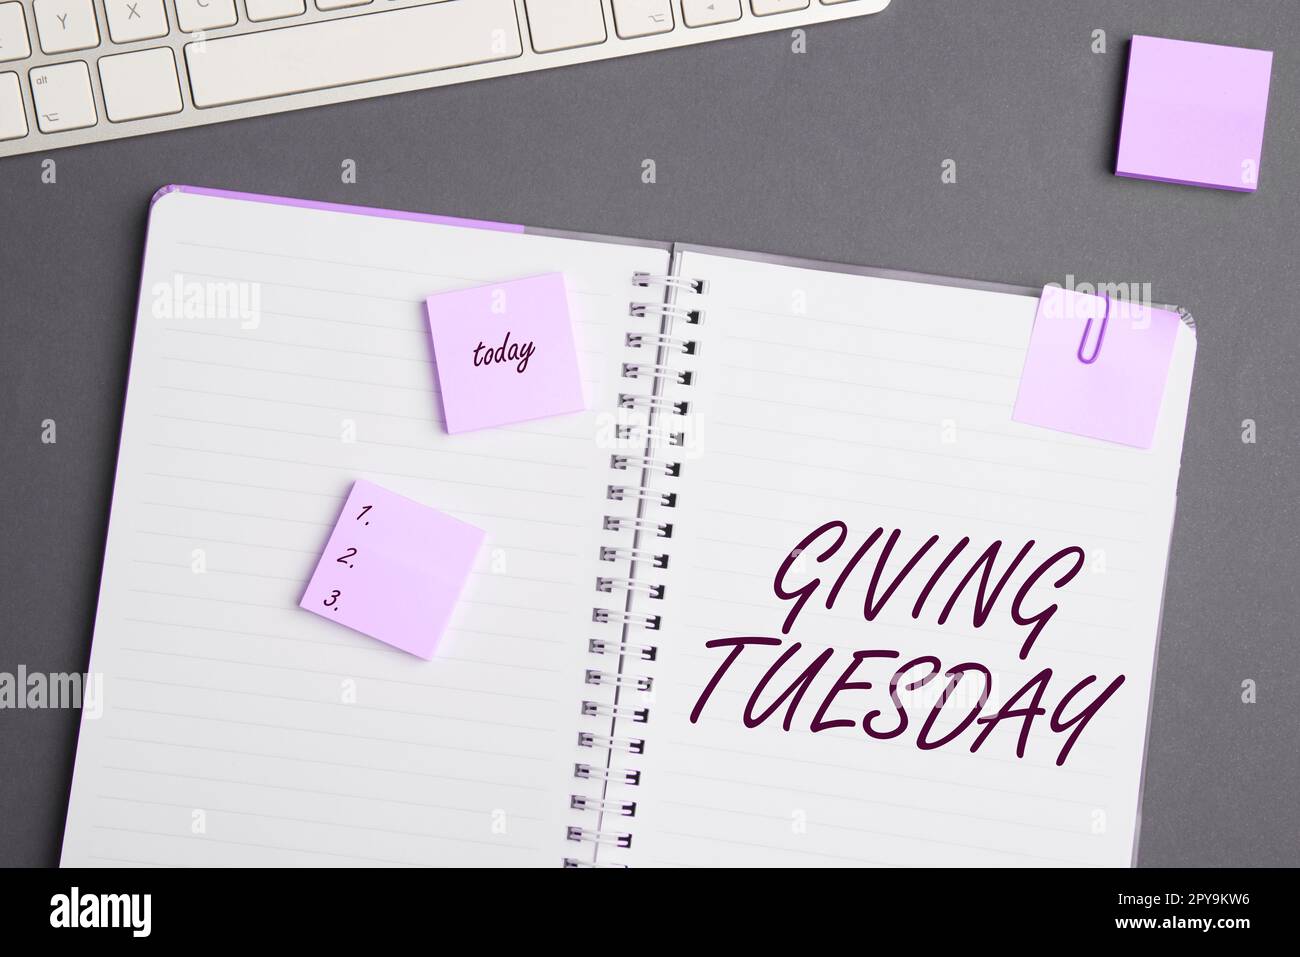 Text sign showing Giving Tuesday. Business idea international day of charitable giving Hashtag activism Stock Photo